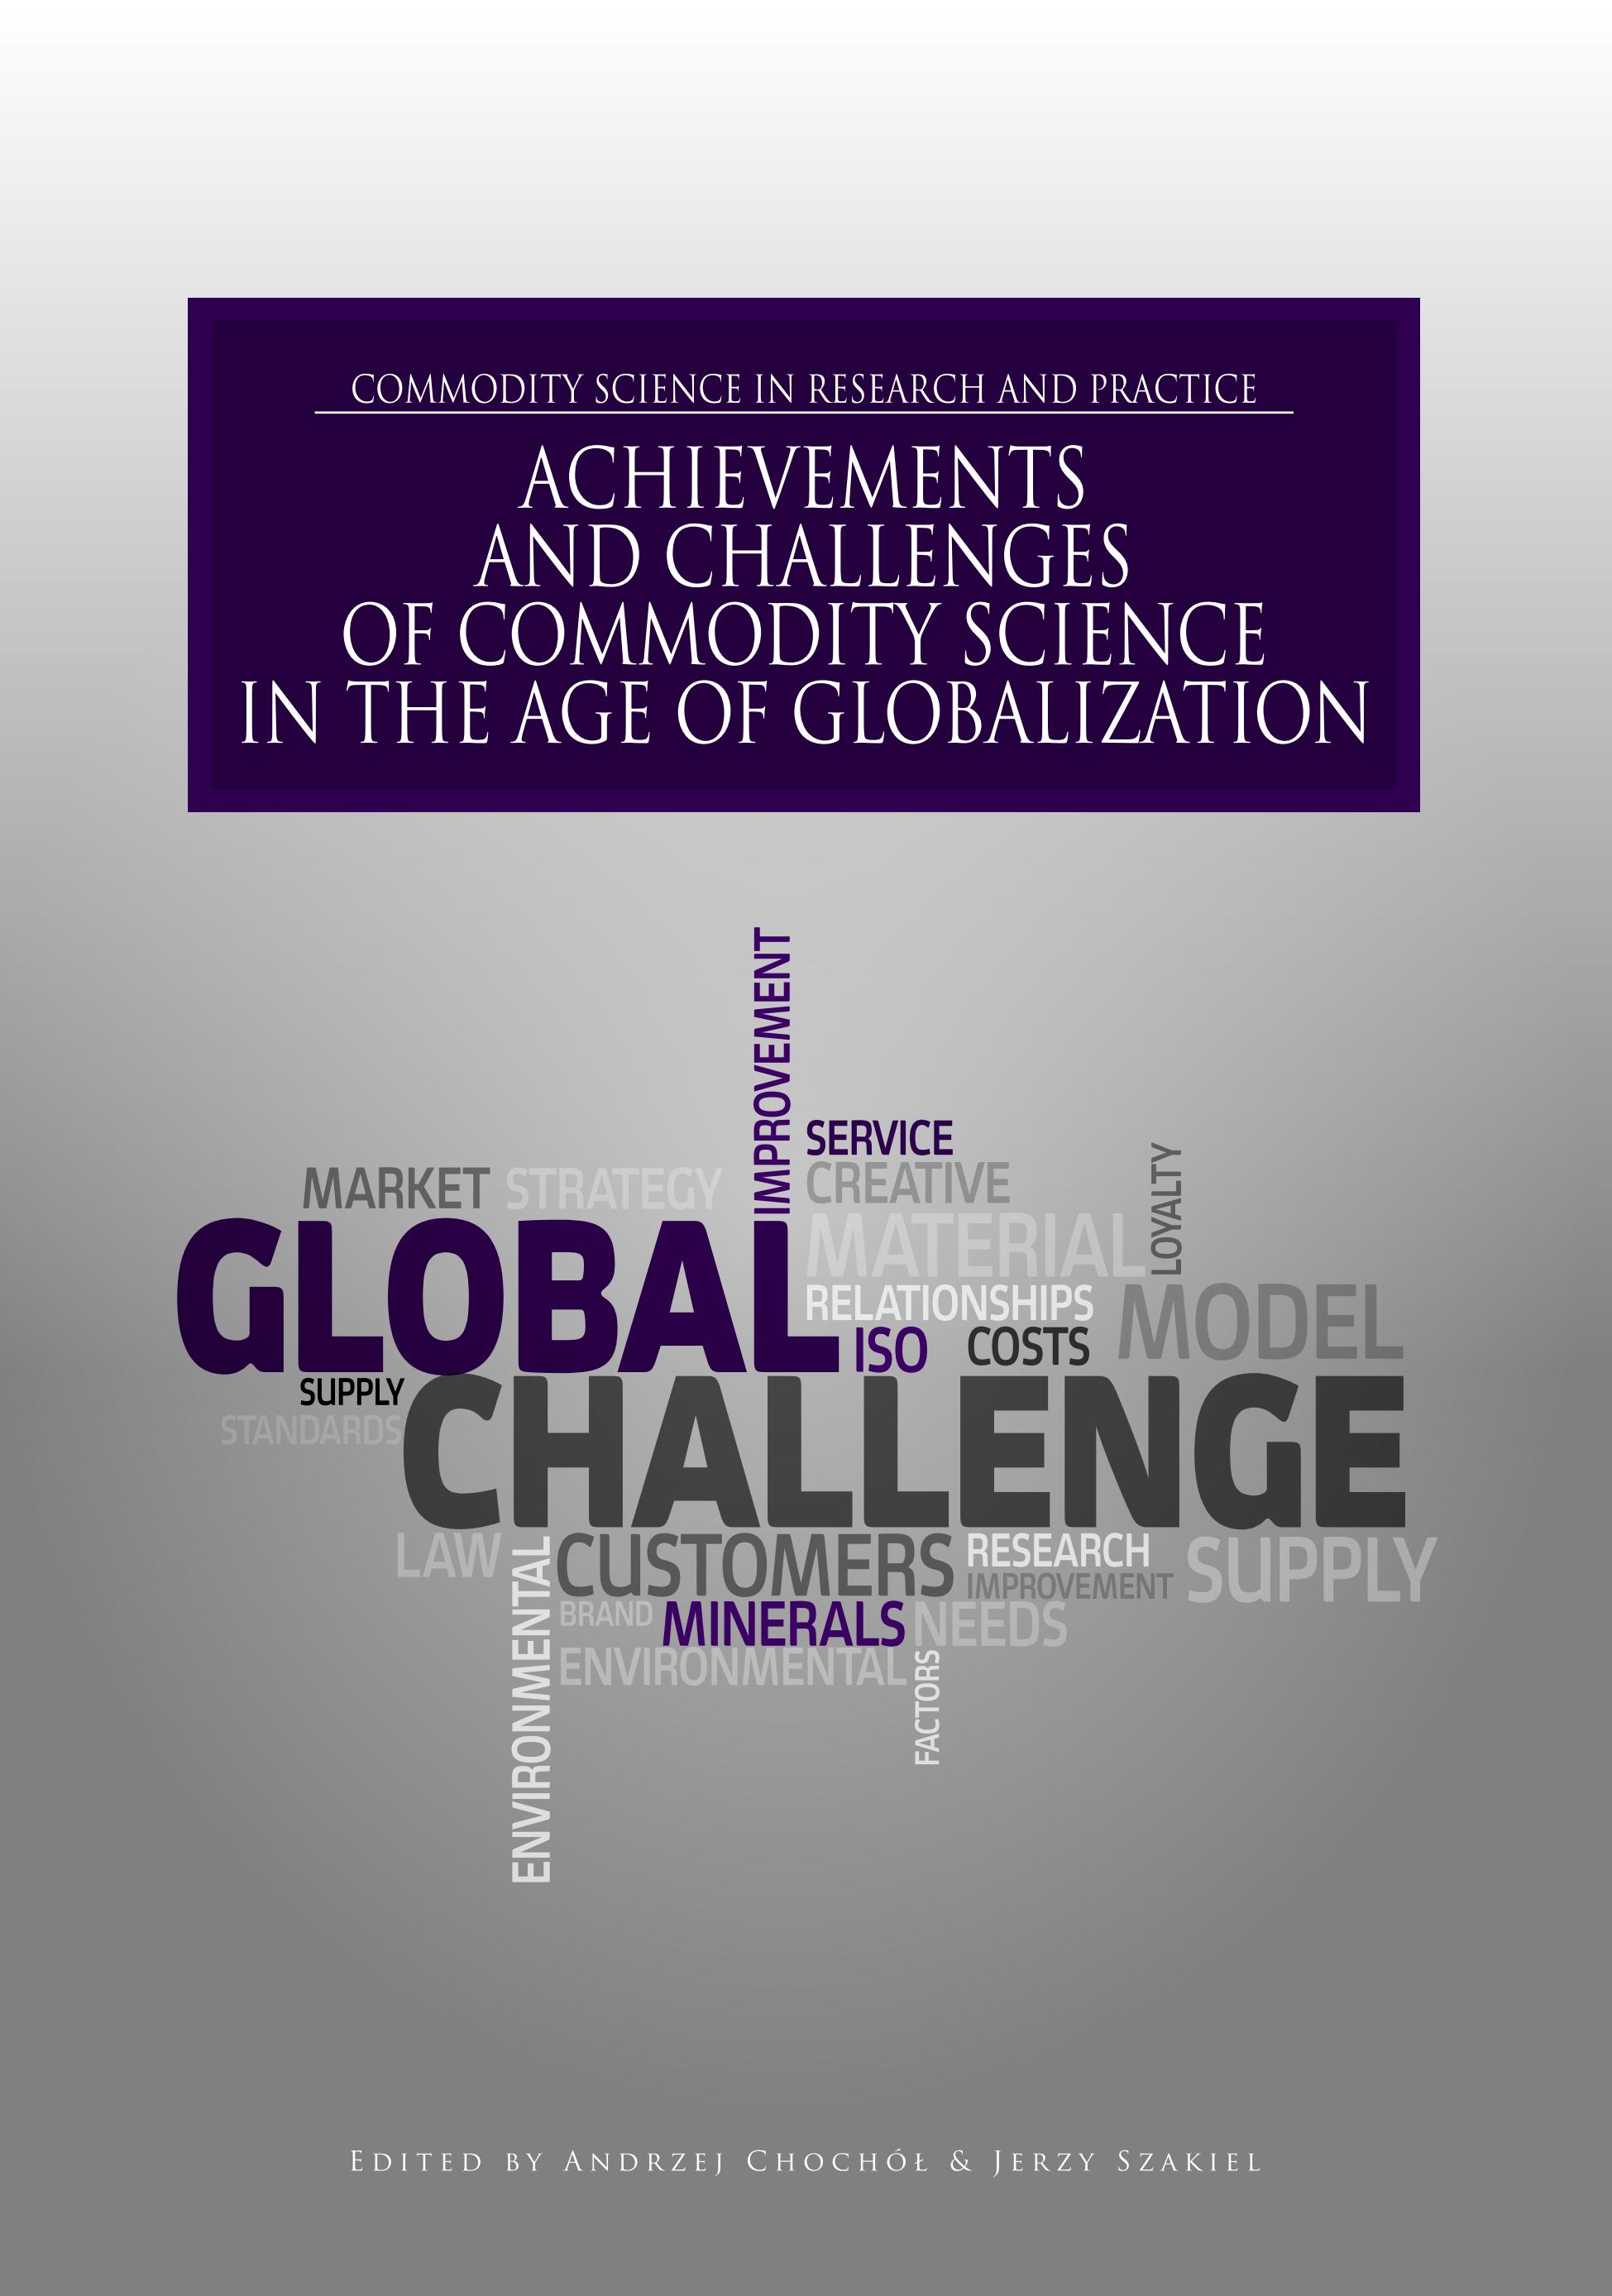 ACHIEVEMENTS_AND_CHALLENGES_OF_COMMODITY_SCIENCE_IN_THE_AGE_OF_GLOBALIZATION_ed_by_Chochol&Szakiel_01